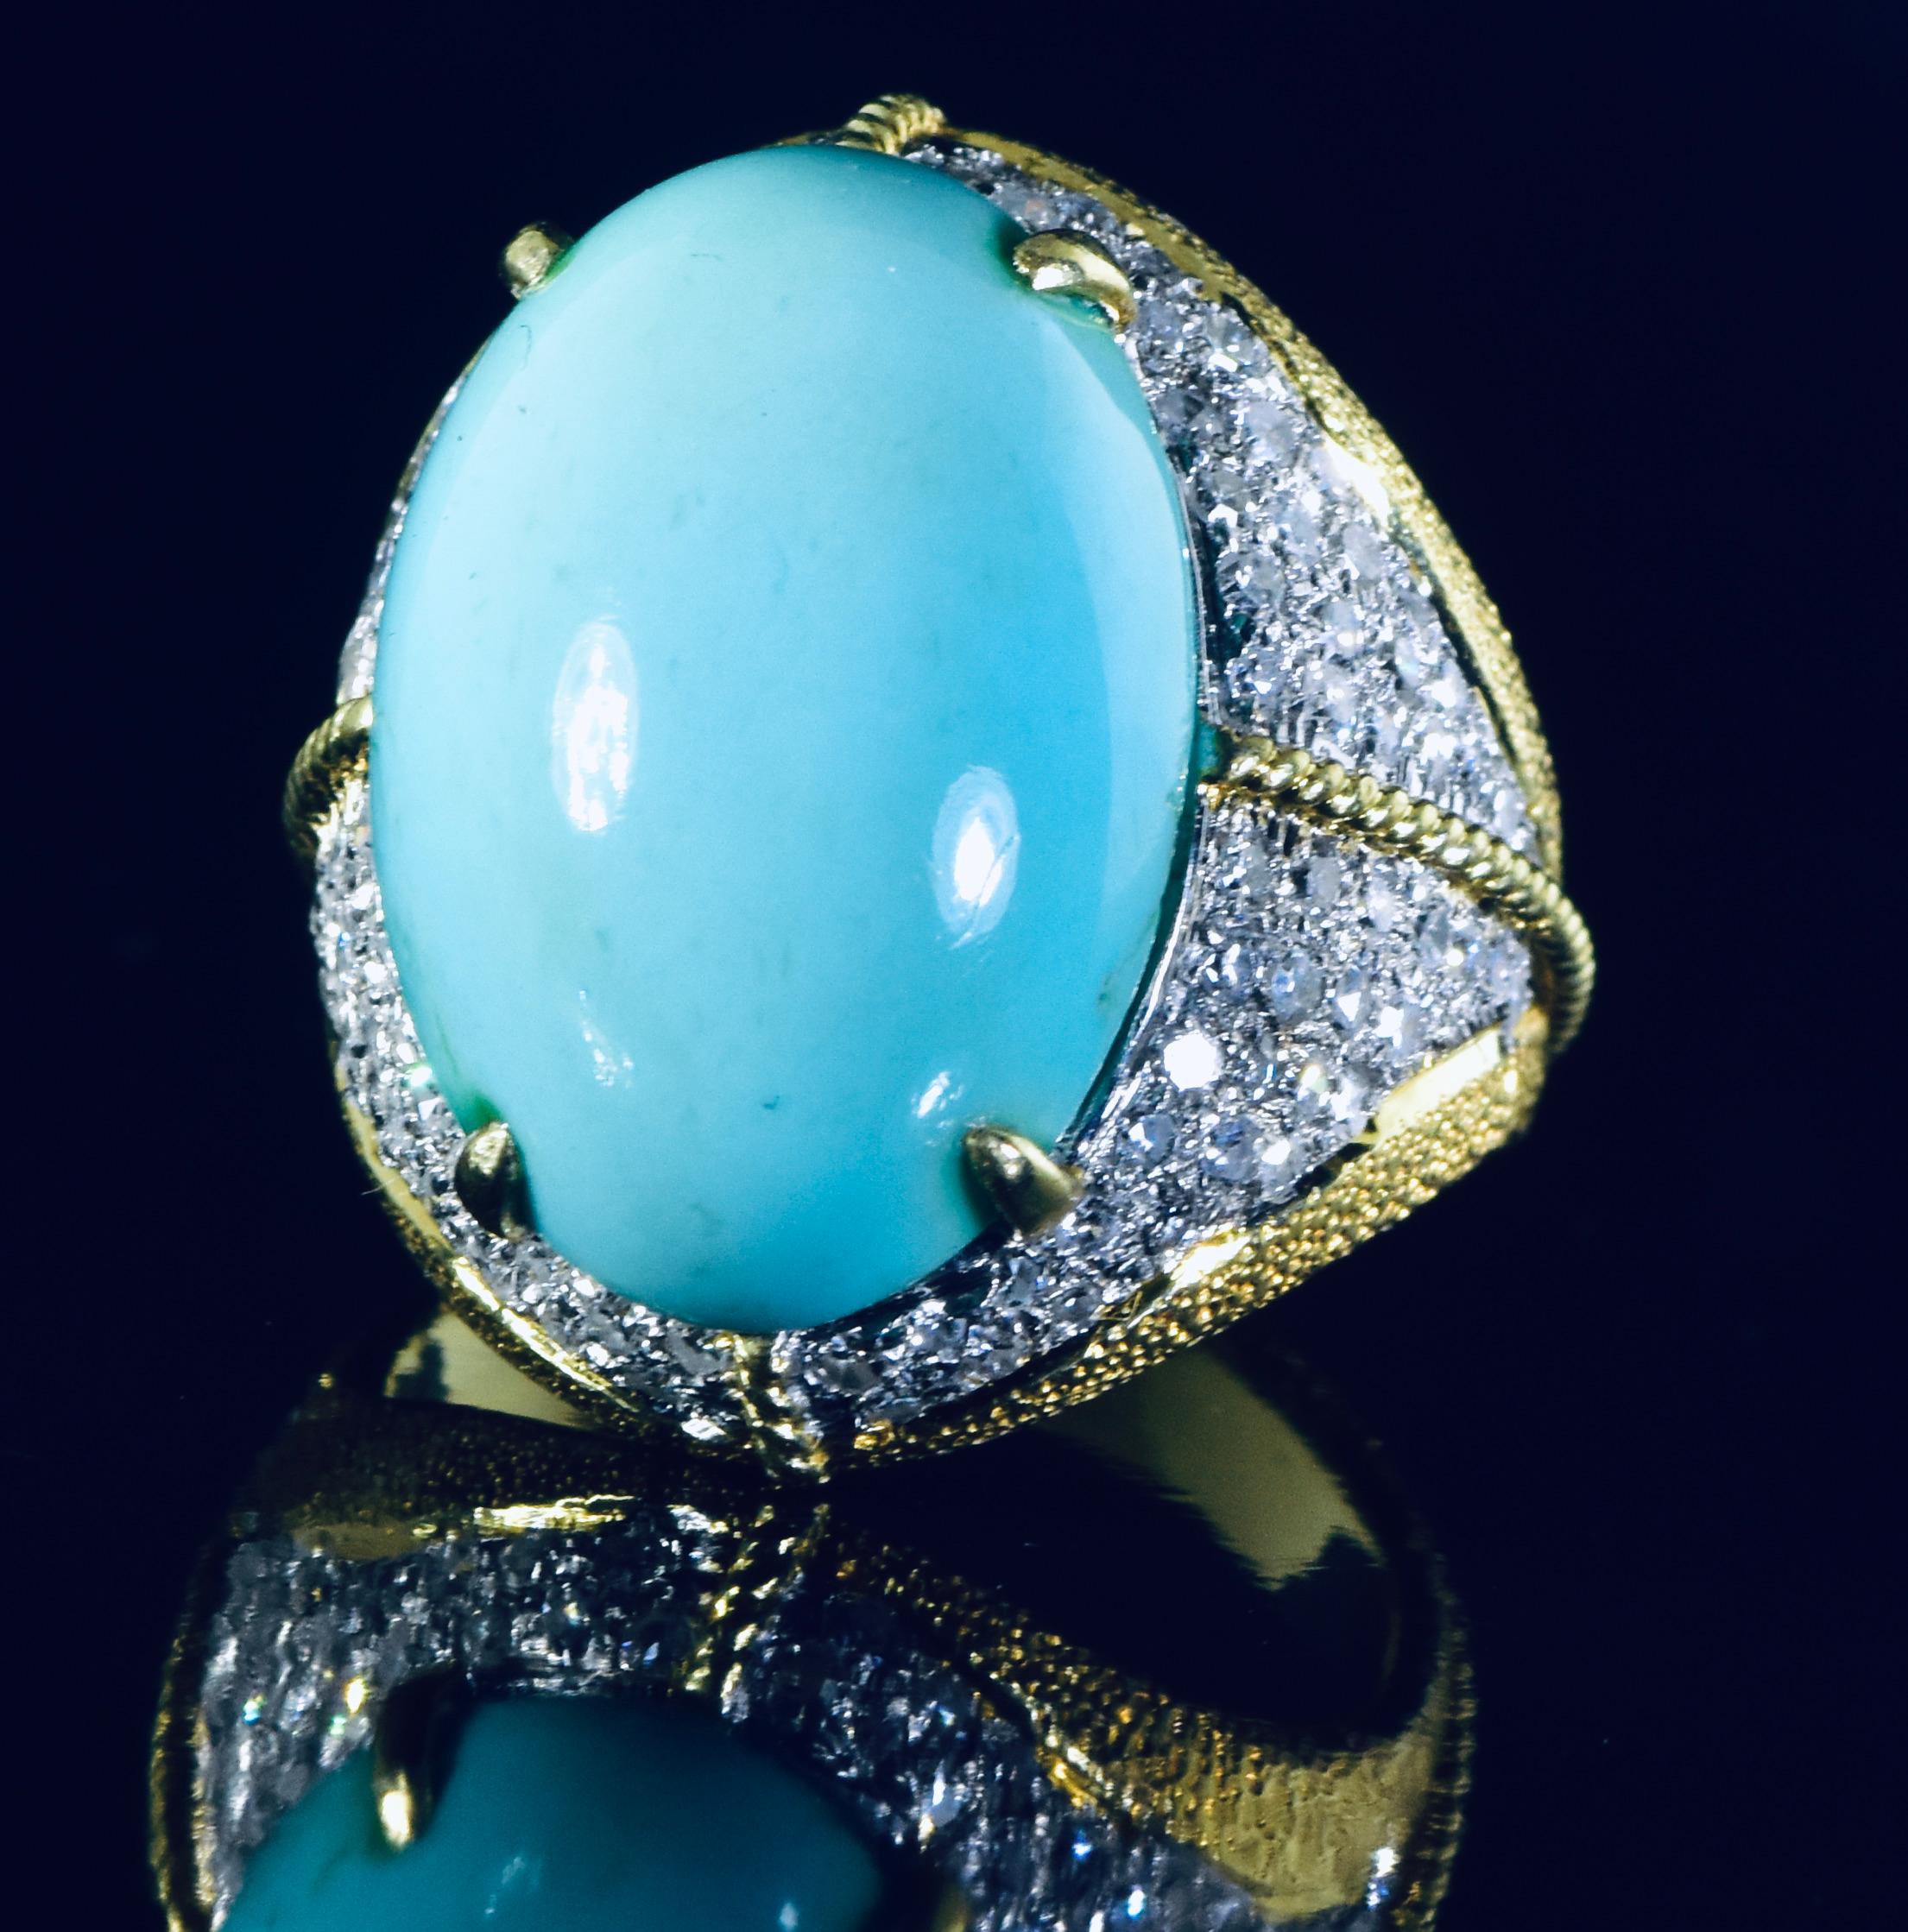 18K, diamond and fine old natural Persian Turquoise ring.  This large and impressive ring in 18K yellow gold with a stippled patina with rope gold accents, centers a fine oval stone with the classic turquoise color from the mines of Persia, weighing